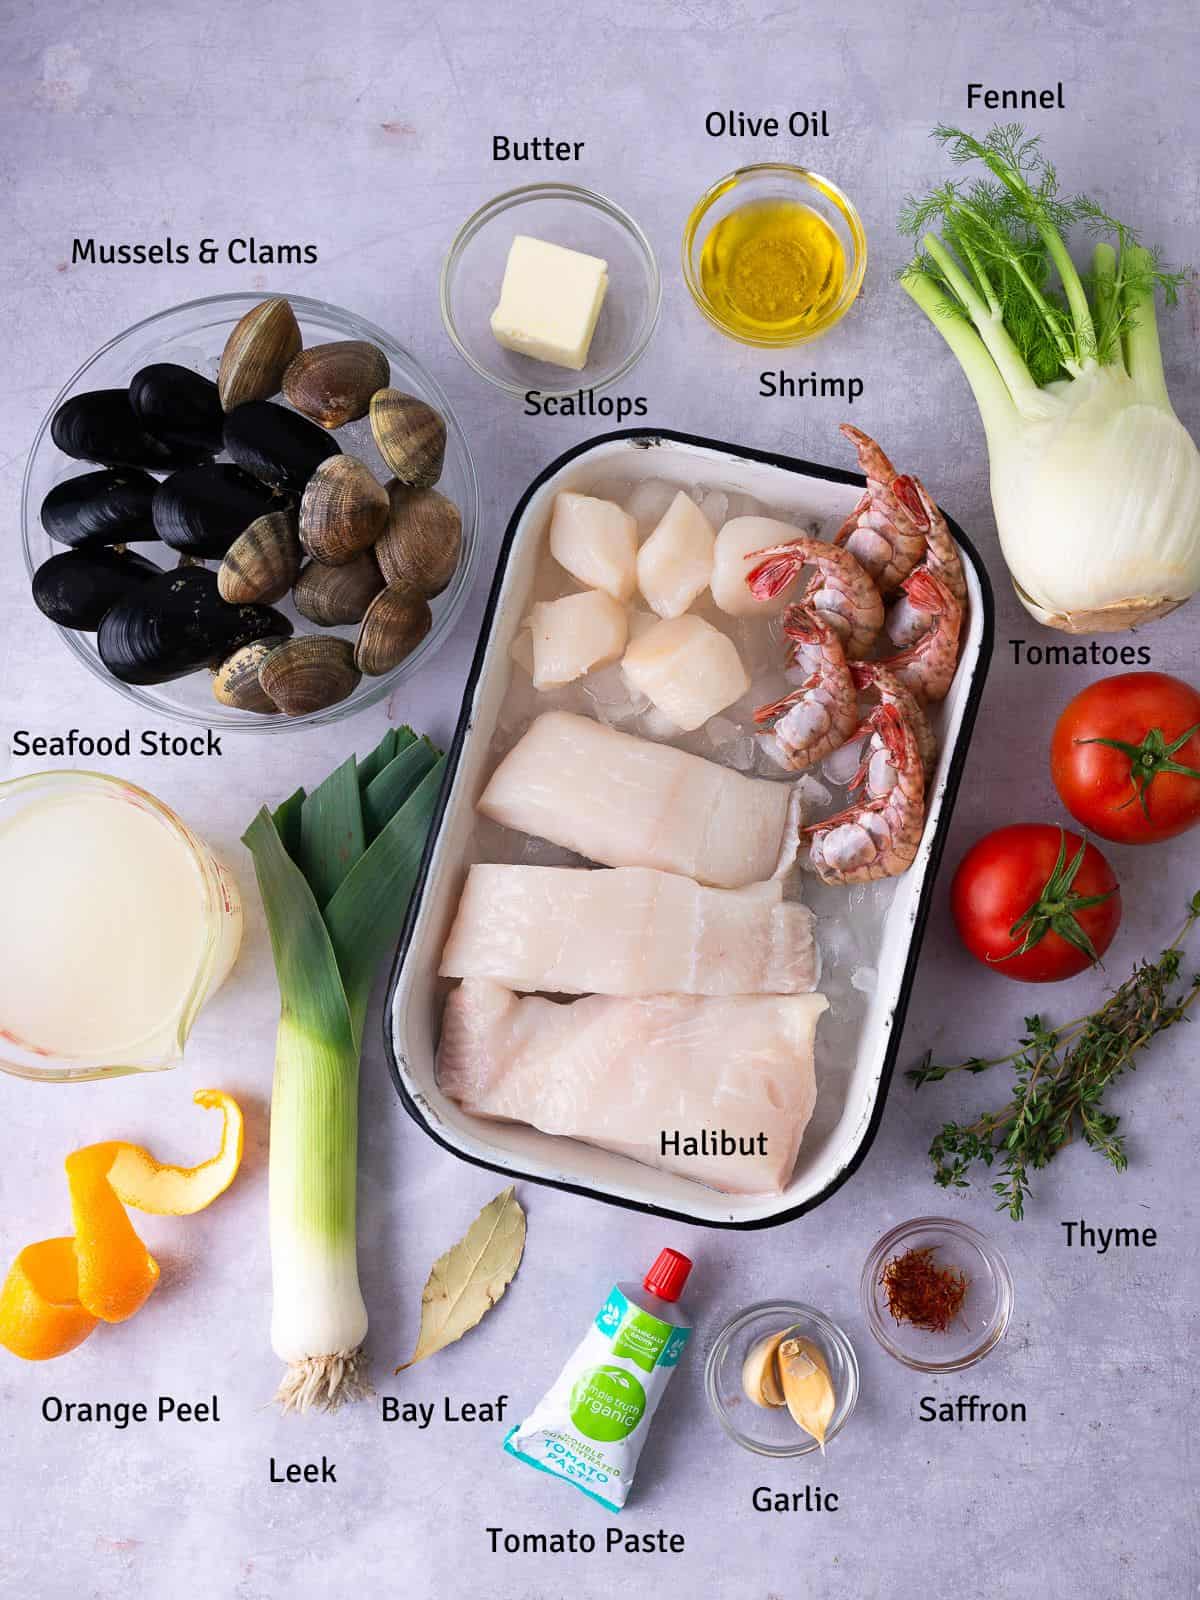 Ingredients for Bouillabaisse, a French seafood stew, including fennel, saffron and assorted seafood.